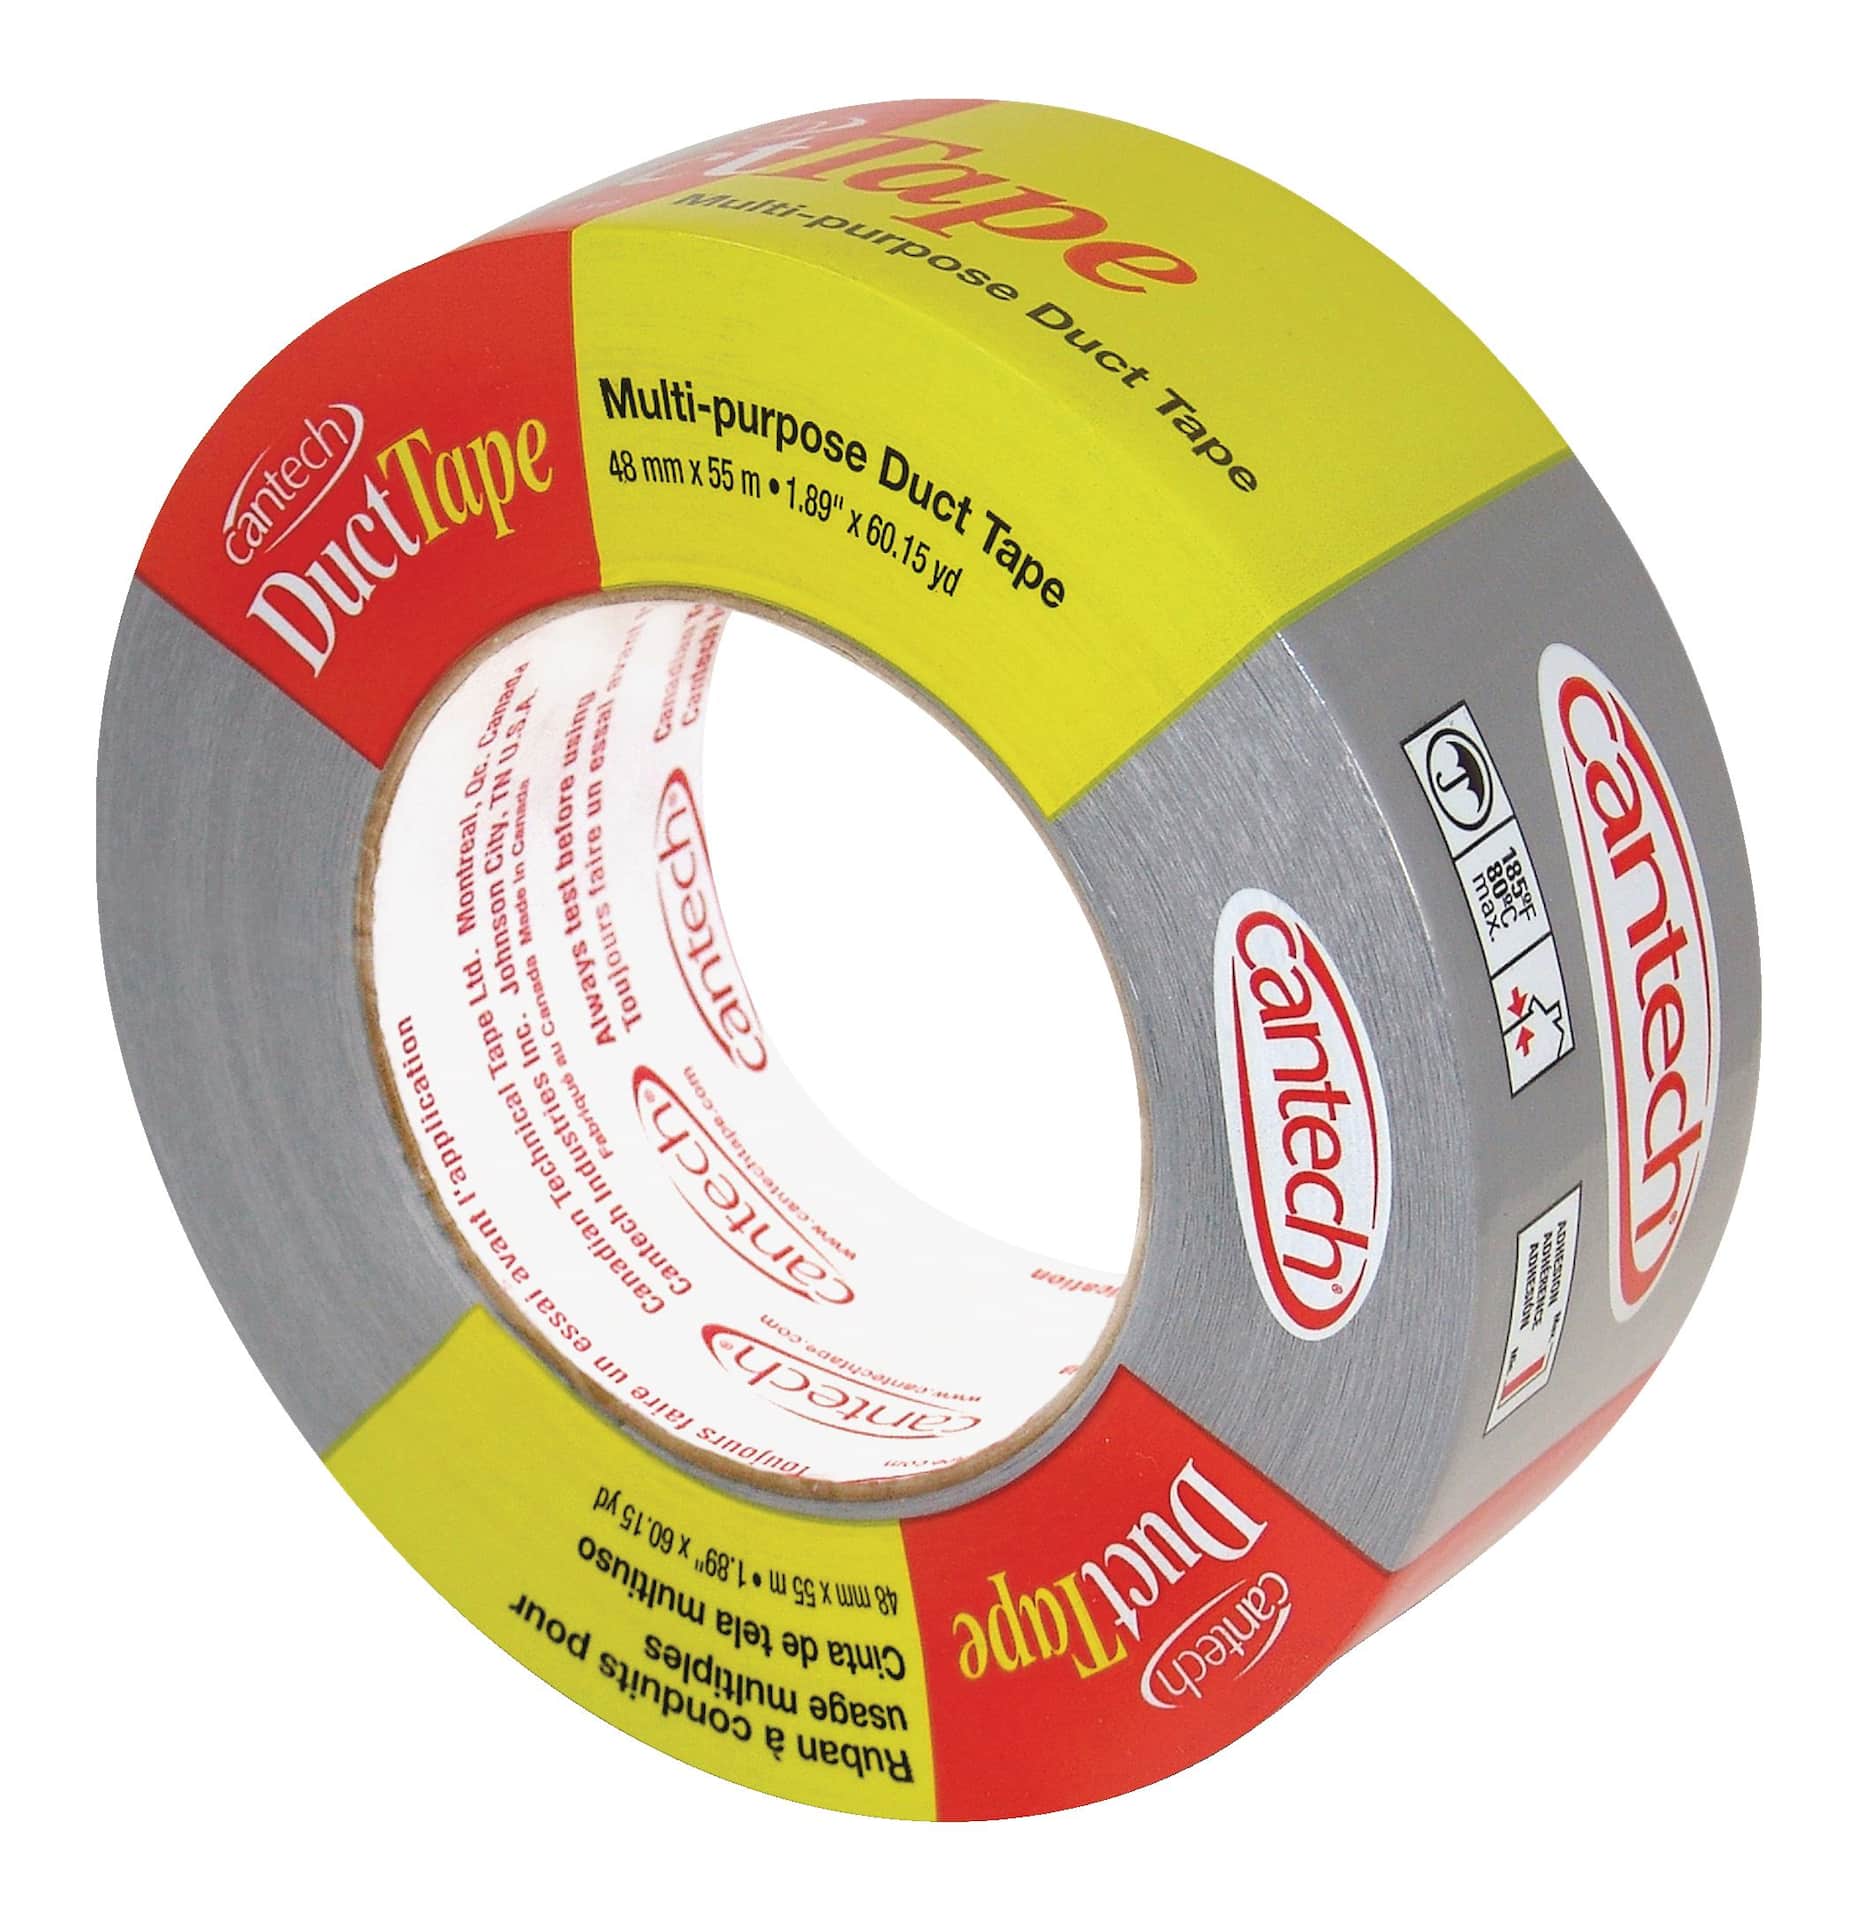 Cantech Multi-Purpose Duct Tape, Heavy Duty Utility Tape, Silver, 1.9-in x  55-m